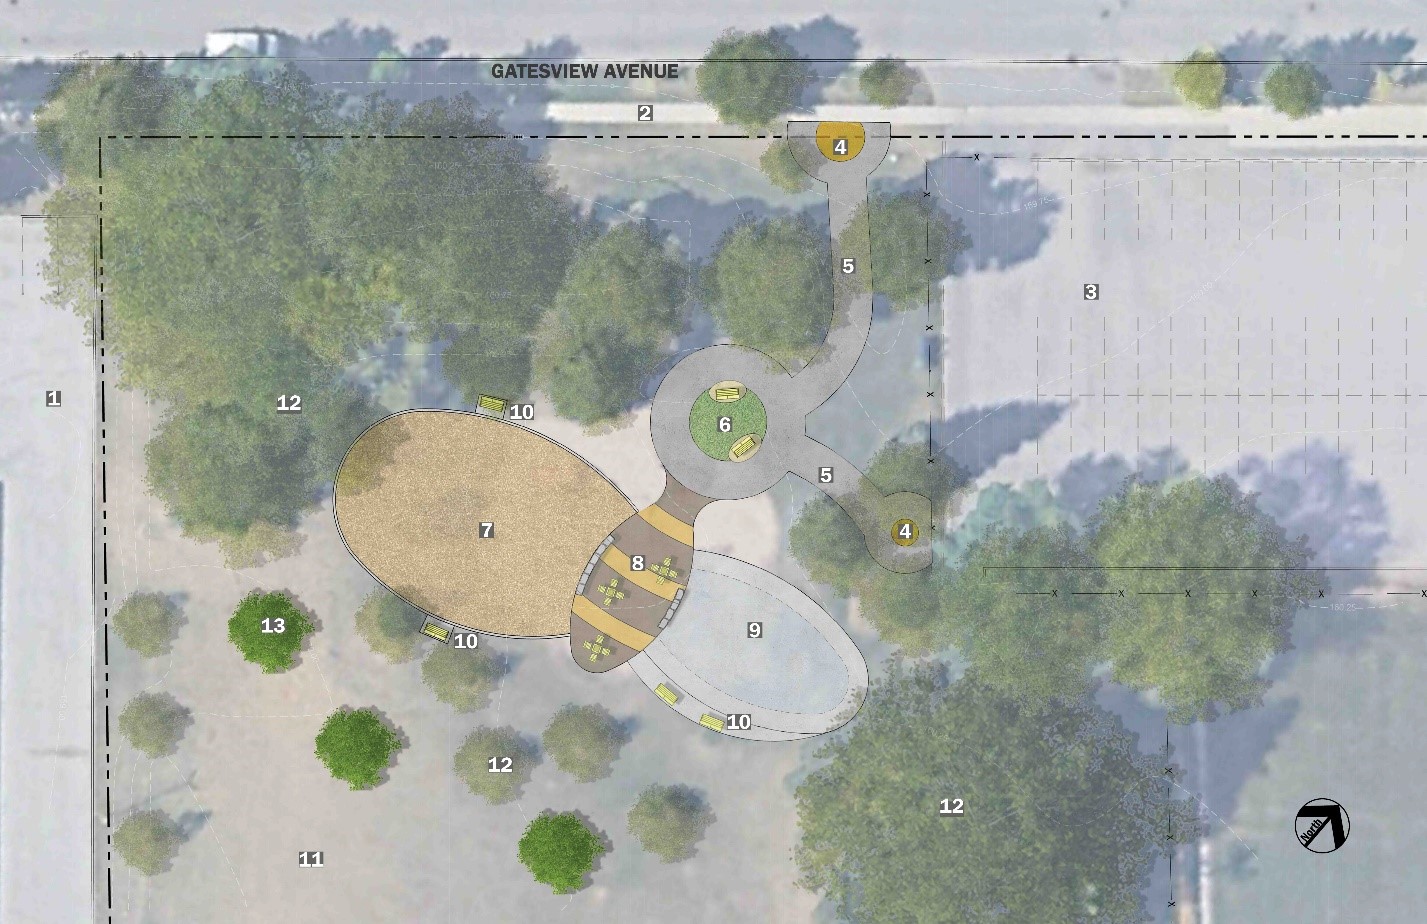 Map showing a proposed playground layout inspired by a bumble bee. The wings are the playground and splash pad, the body is the gather area, the head is the pollinator garden, and the antennae are pathways.